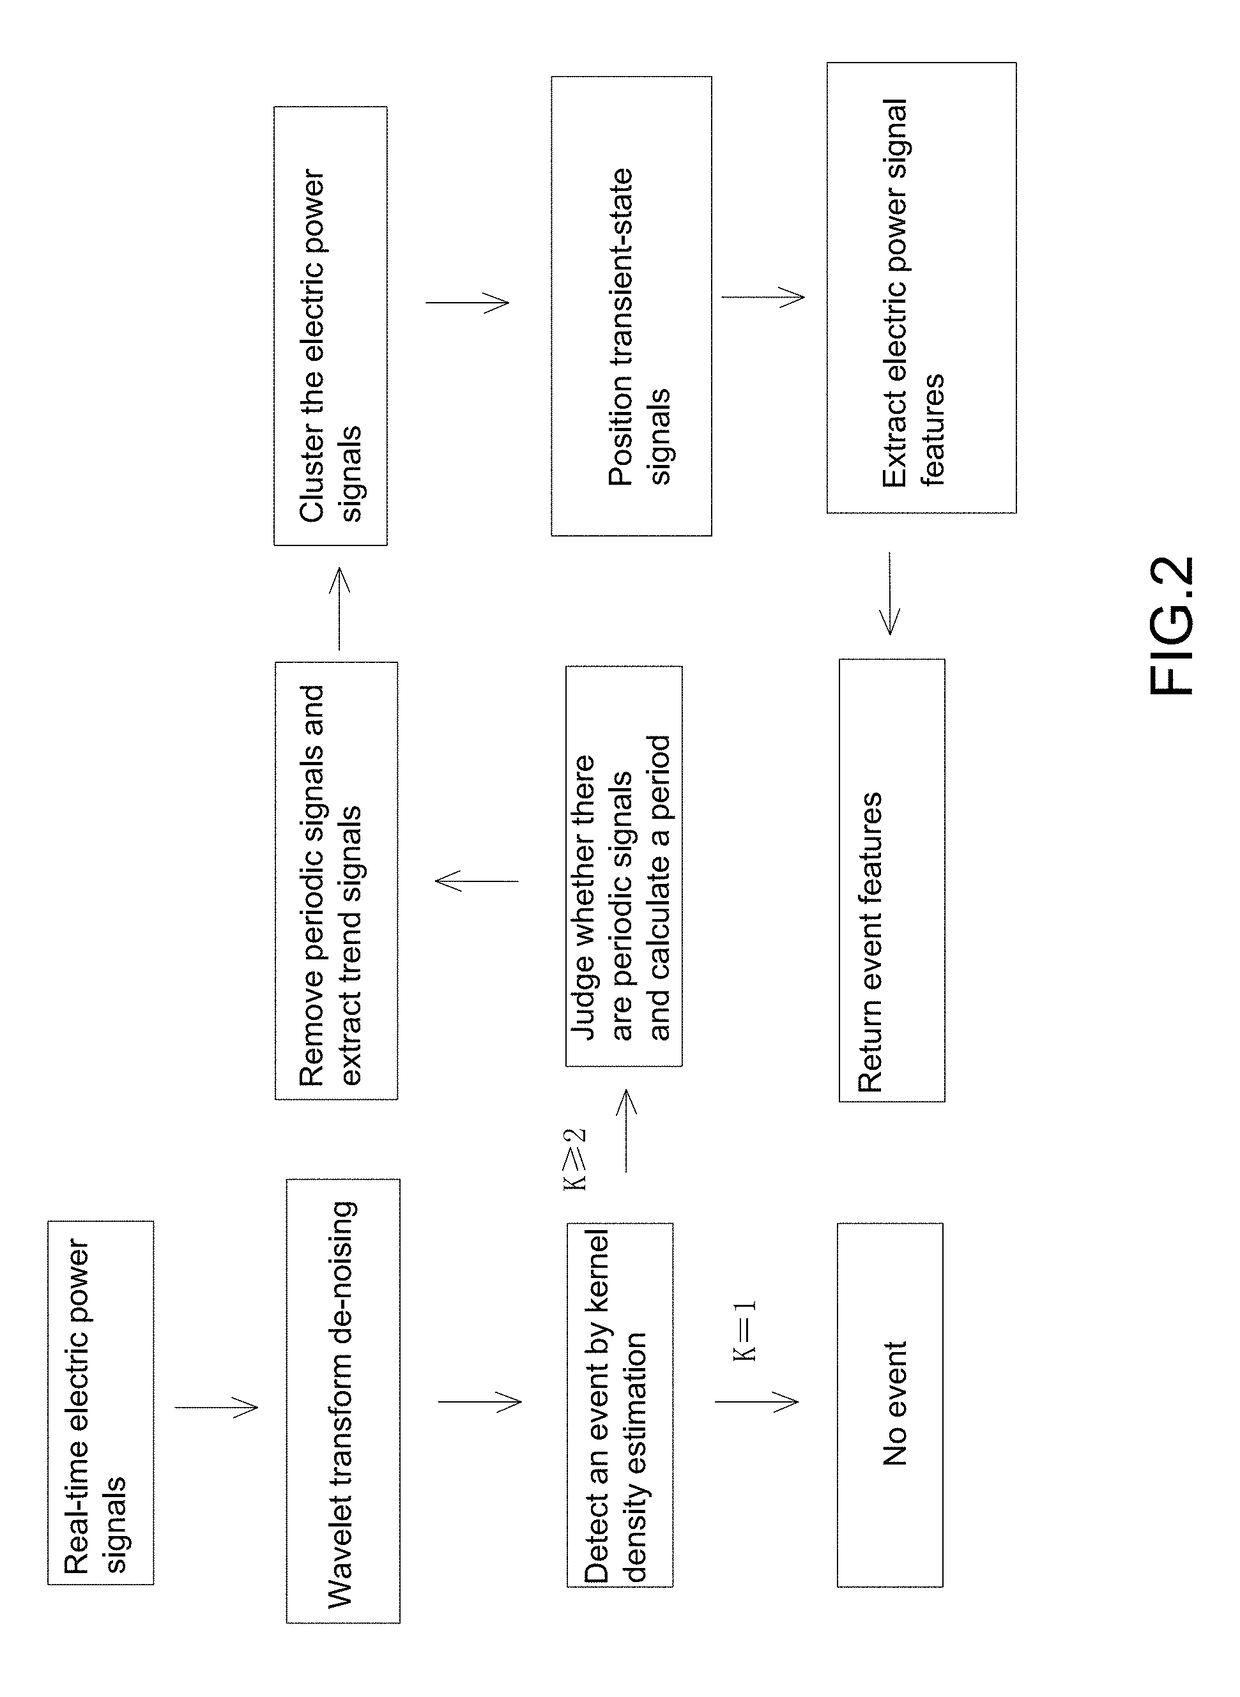 Non-invasive online real-time electric load identification method and identification system